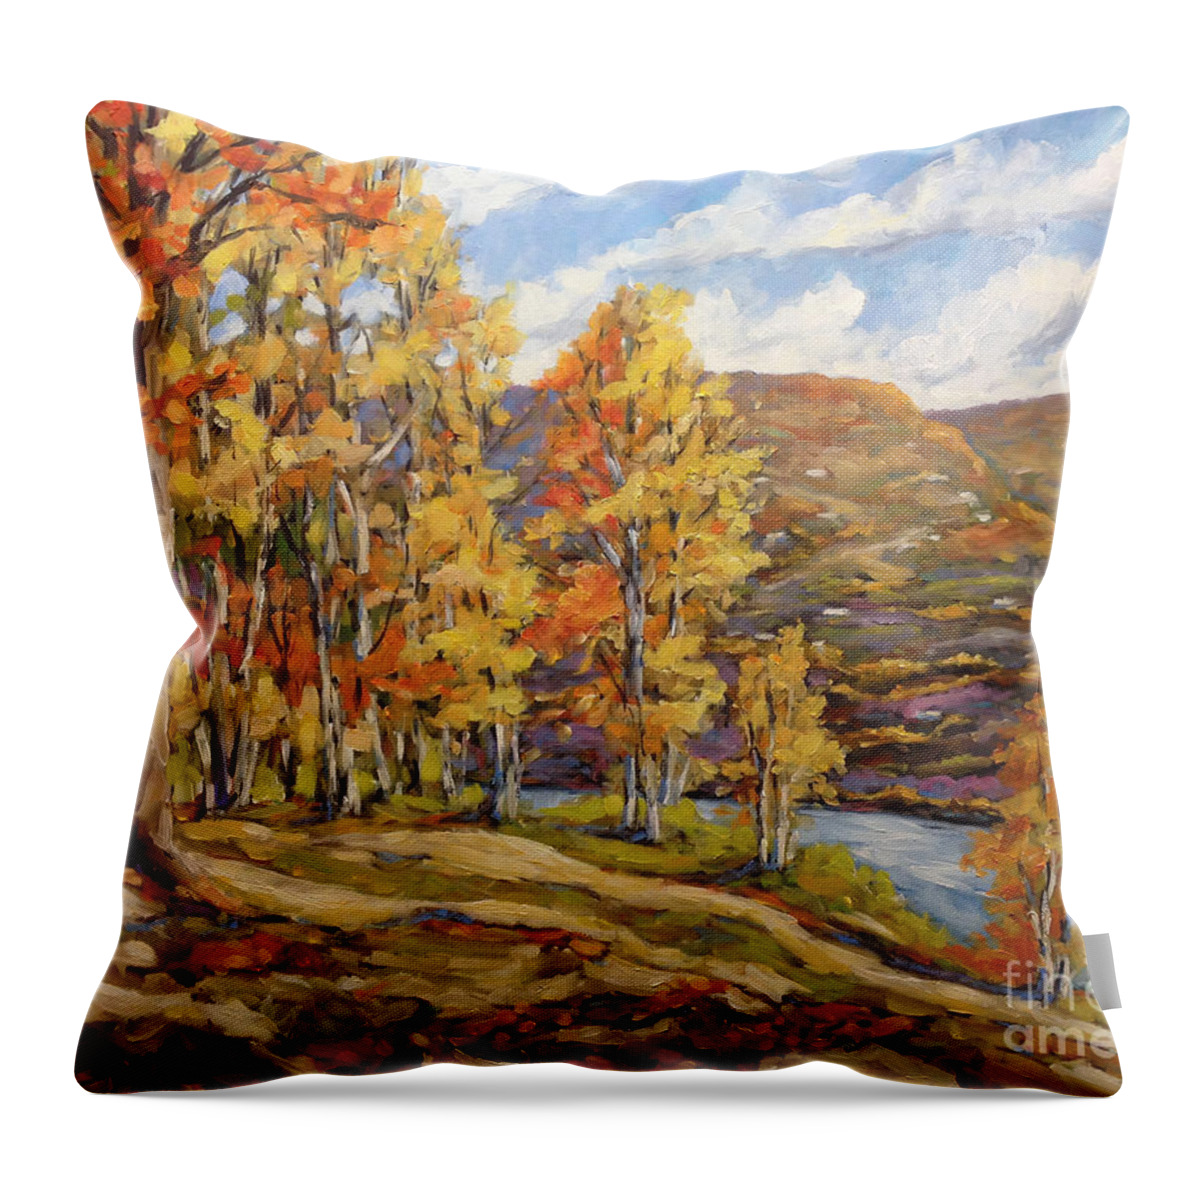 Quebec Throw Pillow featuring the painting Mountain Vista by Prankearts by Richard T Pranke